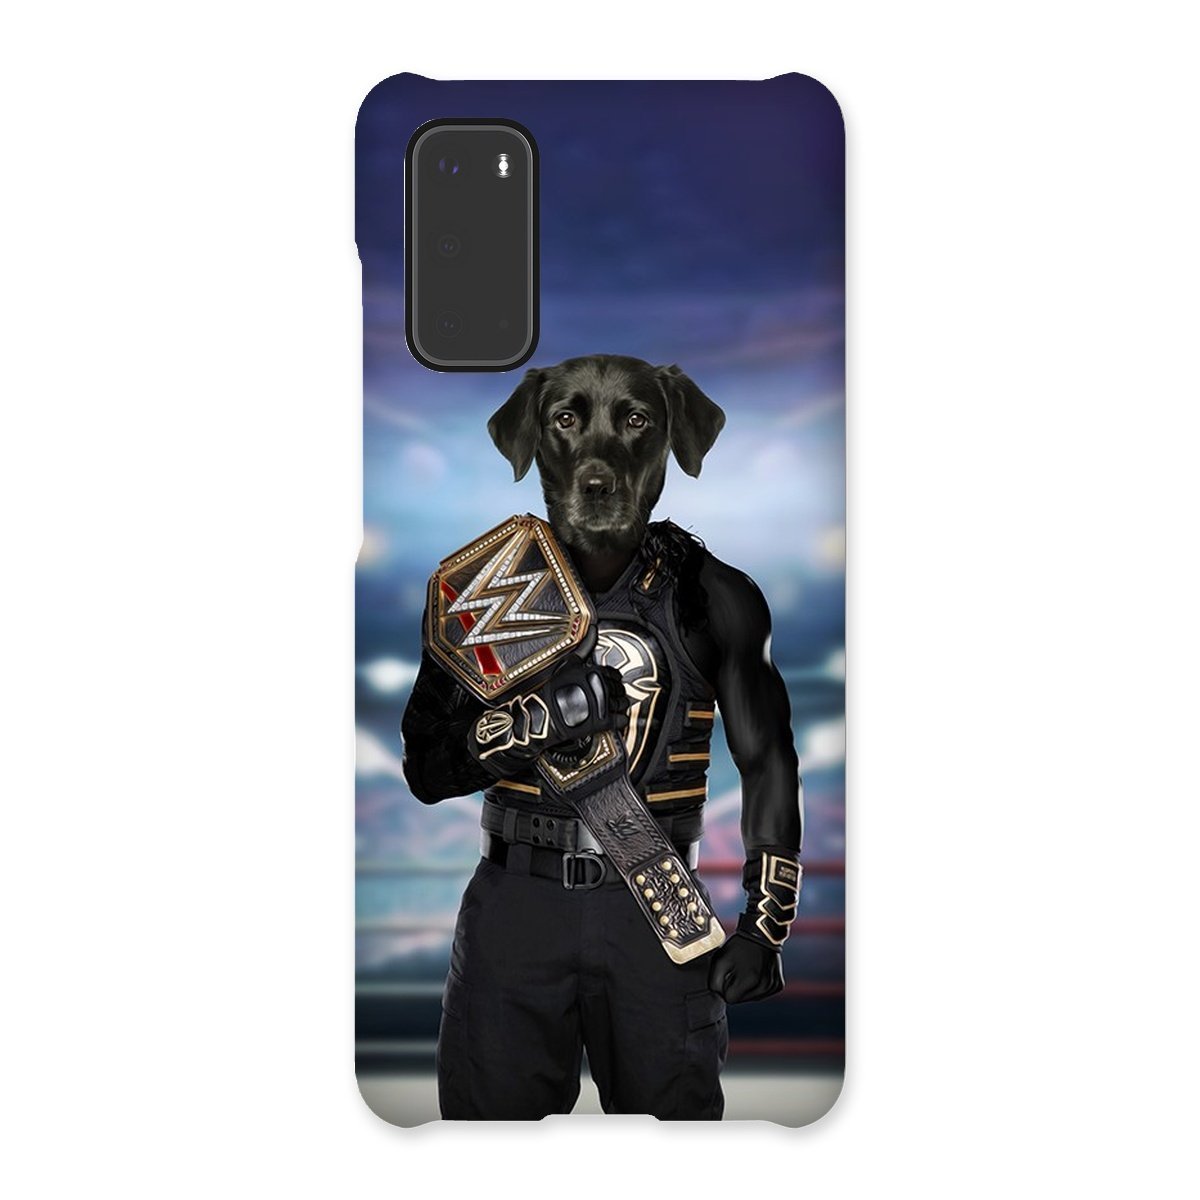 WWE Champ (Roman Reigns Inspired): Custom Pet Phone Case - Paw & Glory - paw and glory, personalised dog phone case, pet portrait phone case uk, phone case dog, dog phone case custom, custom cat phone case, custom dog phone case, Pet Portraits phone case,